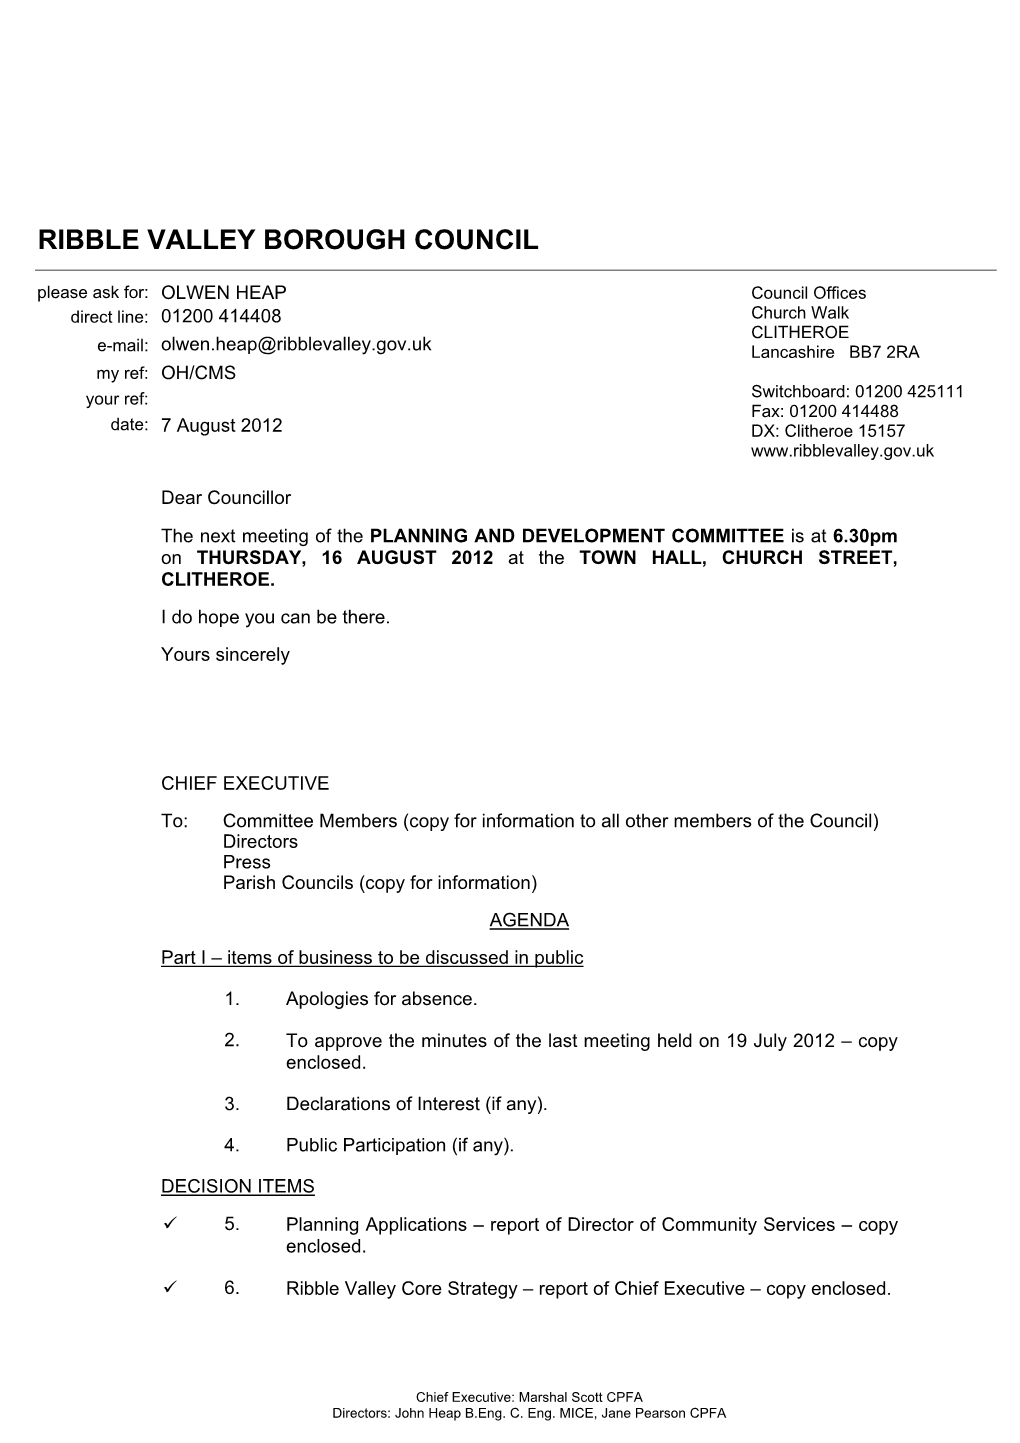 PLANNING and DEVELOPMENT COMMITTEE Agenda Item No Meeting Date: THURSDAY, 16 AUGUST 2012 Title: PLANNING APPLICATIONS Submitted By: DIRECTOR of COMMUNITY SERVICES